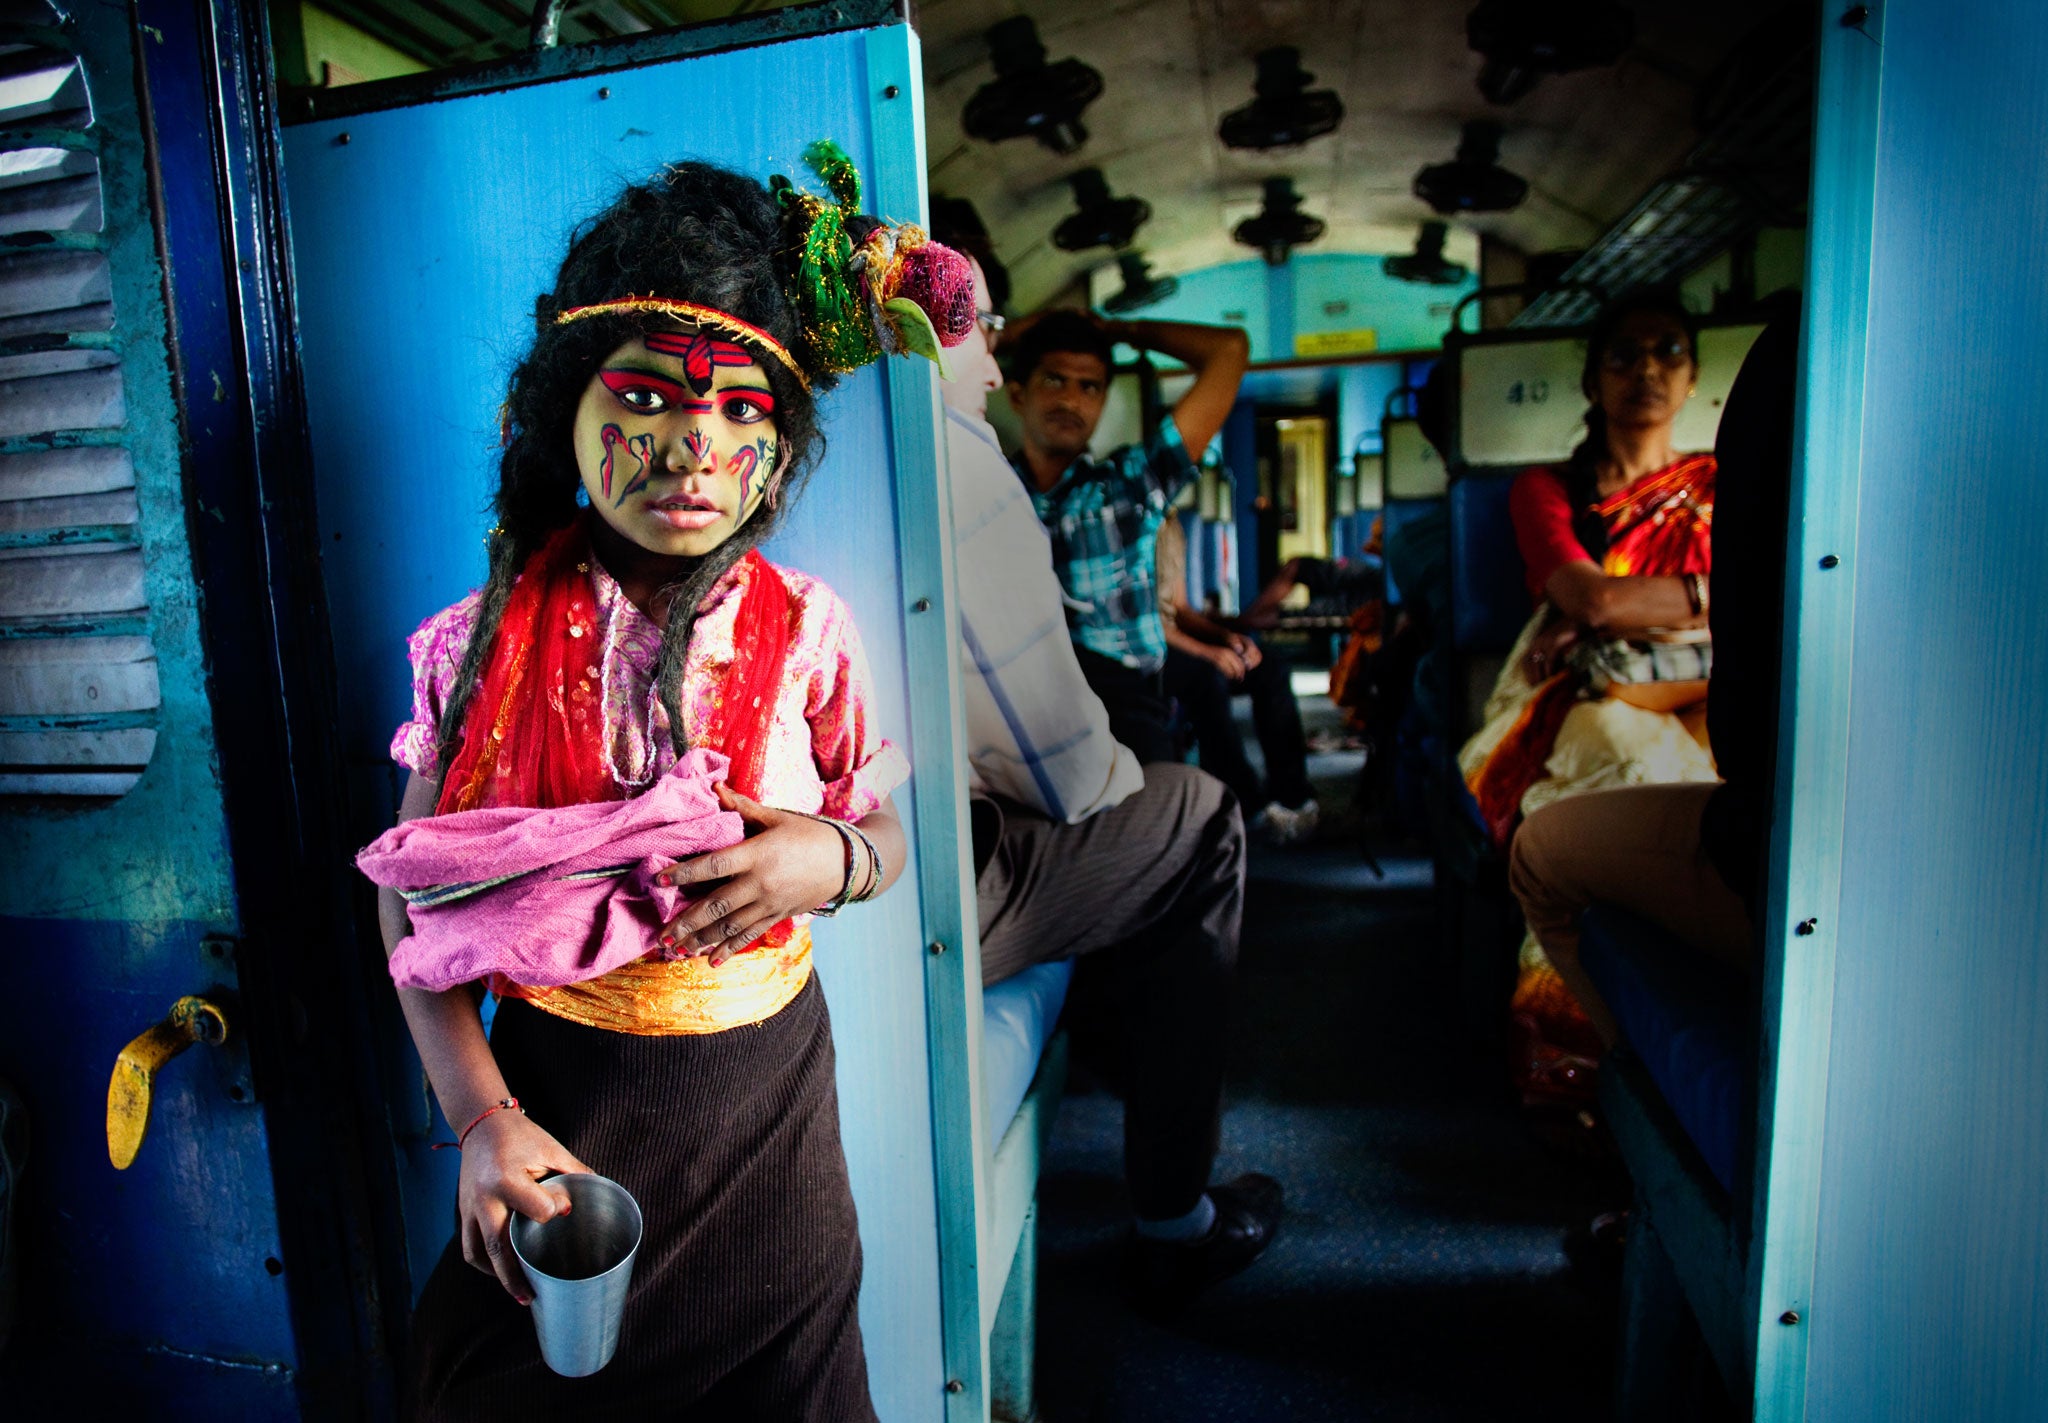 I was on Durga Puja Festival vacation, travelling on a local train. A boy was singing devotional song and begging for alms. He was guised as a Hindu god, Lord Shiva. This is a common view in Indian trains but this boy was charming, bright and did have a m